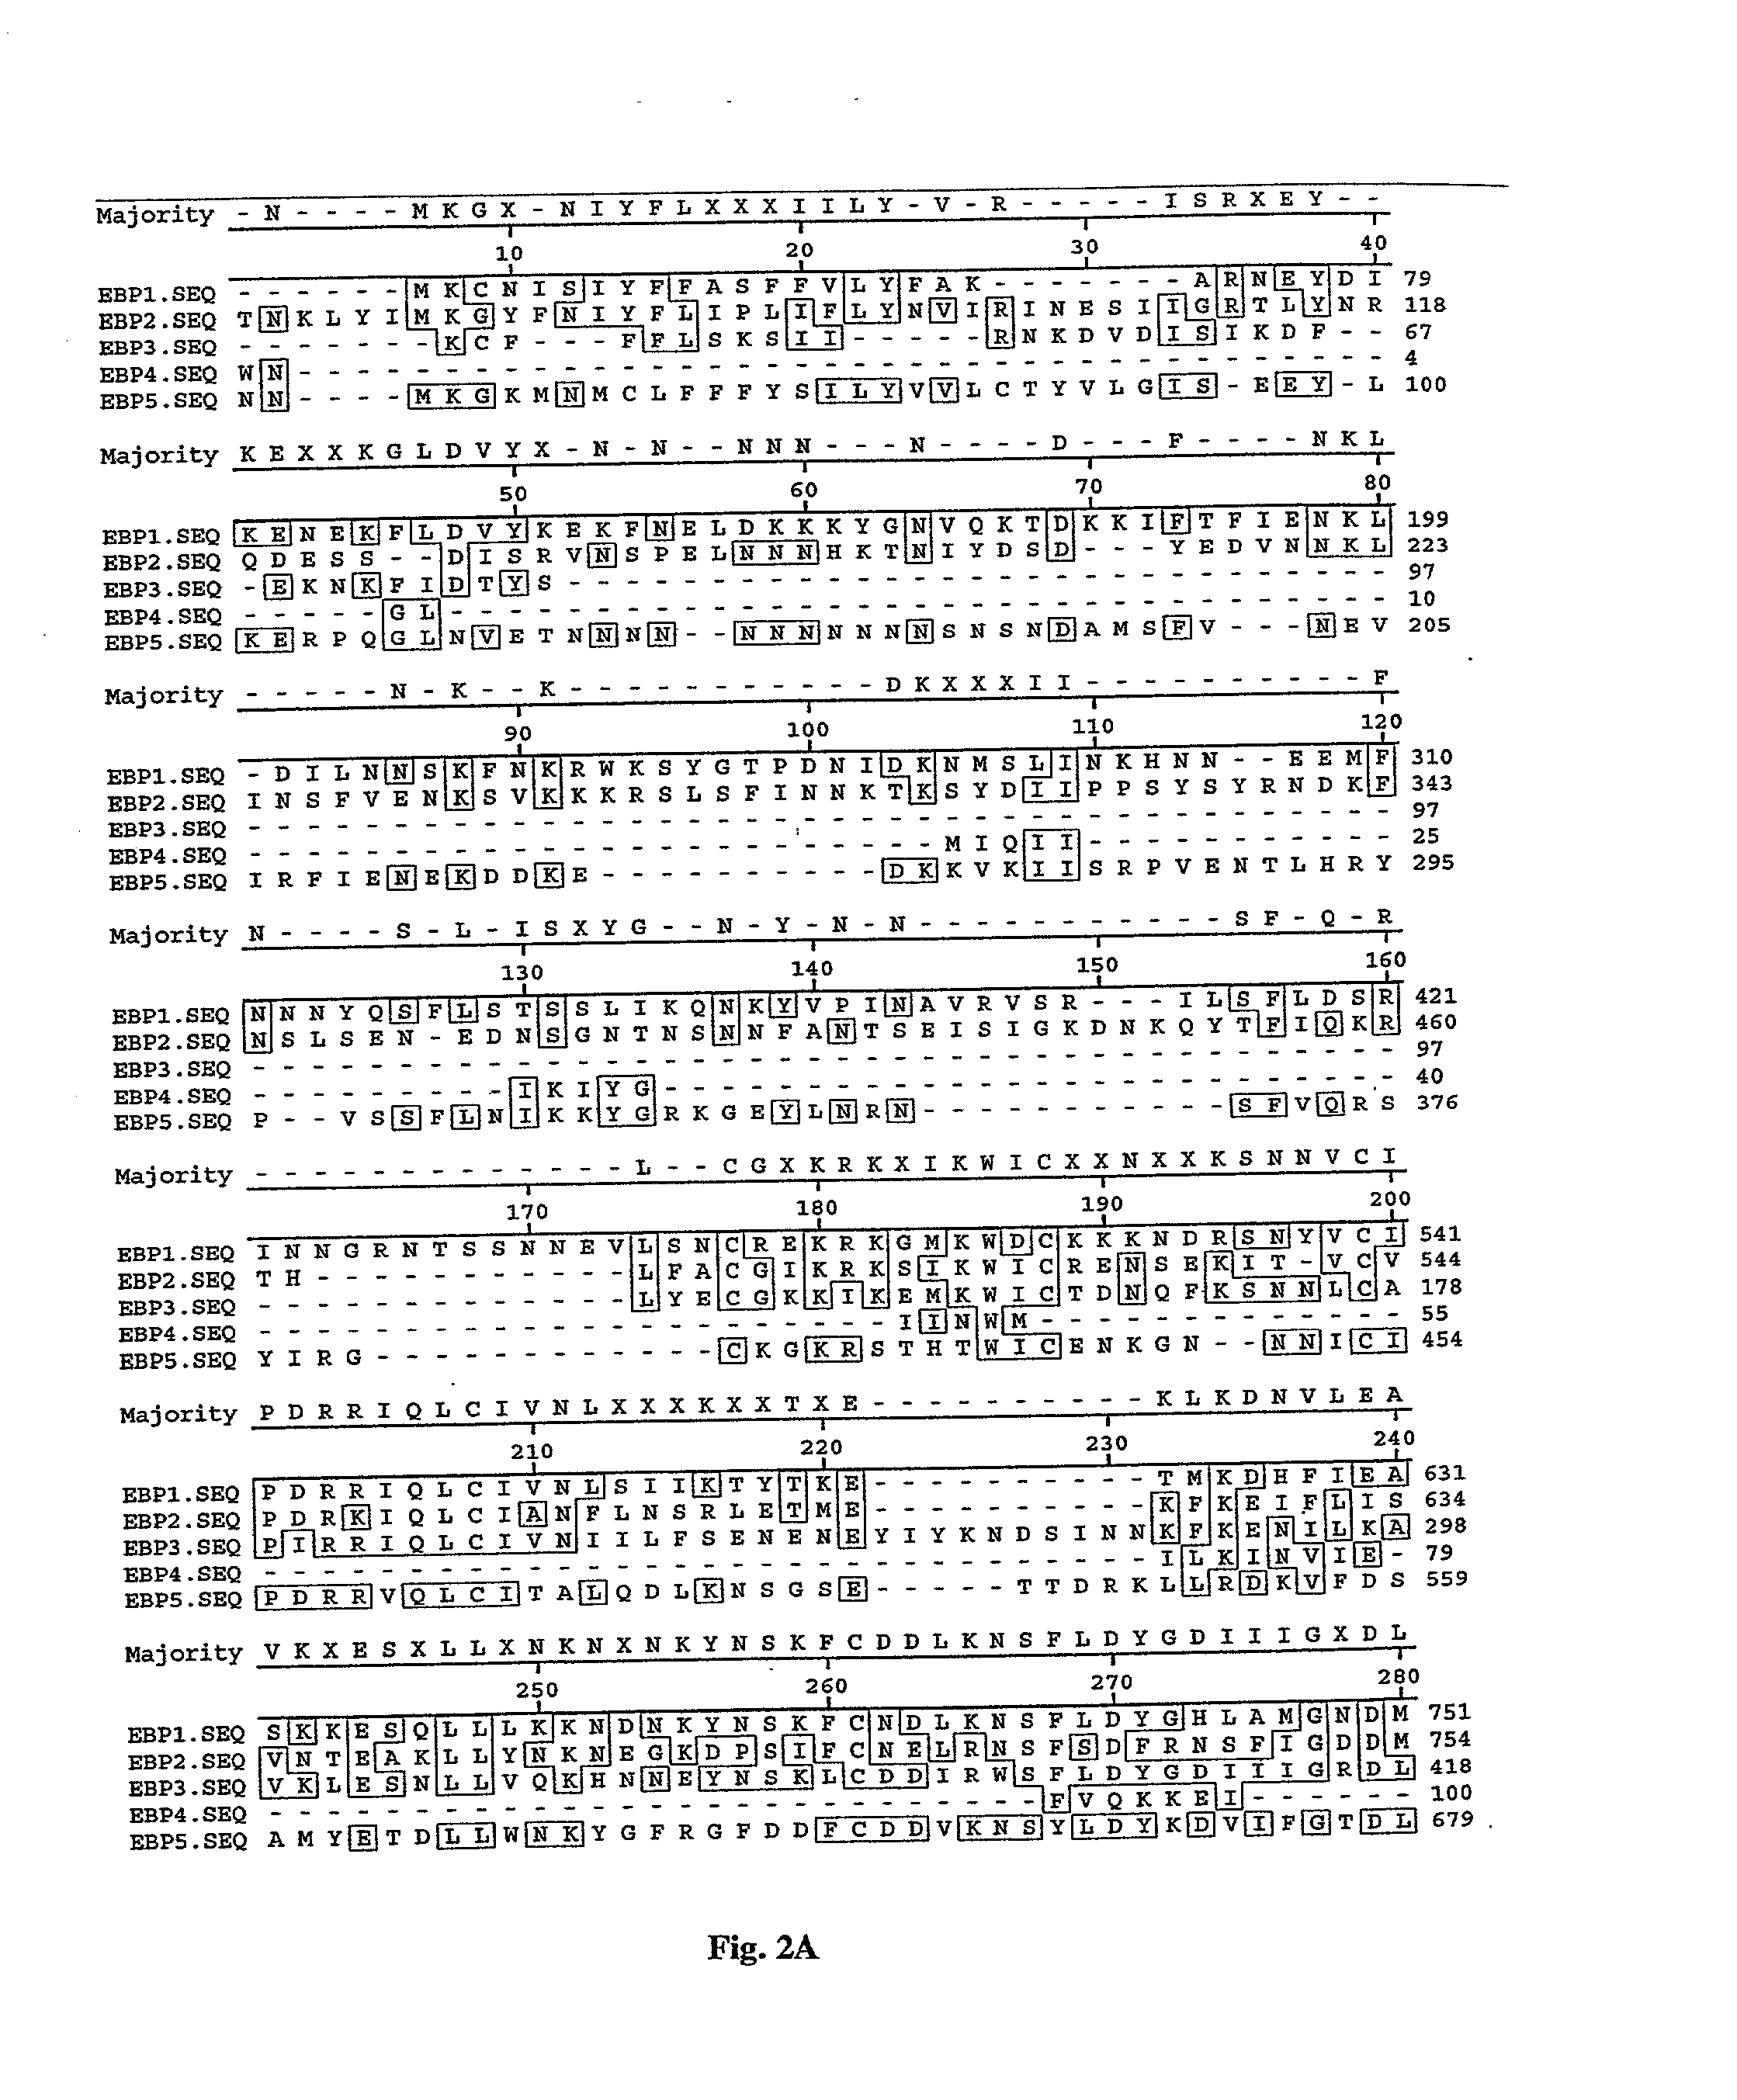 Anti-plasmodium compositions and methods of use